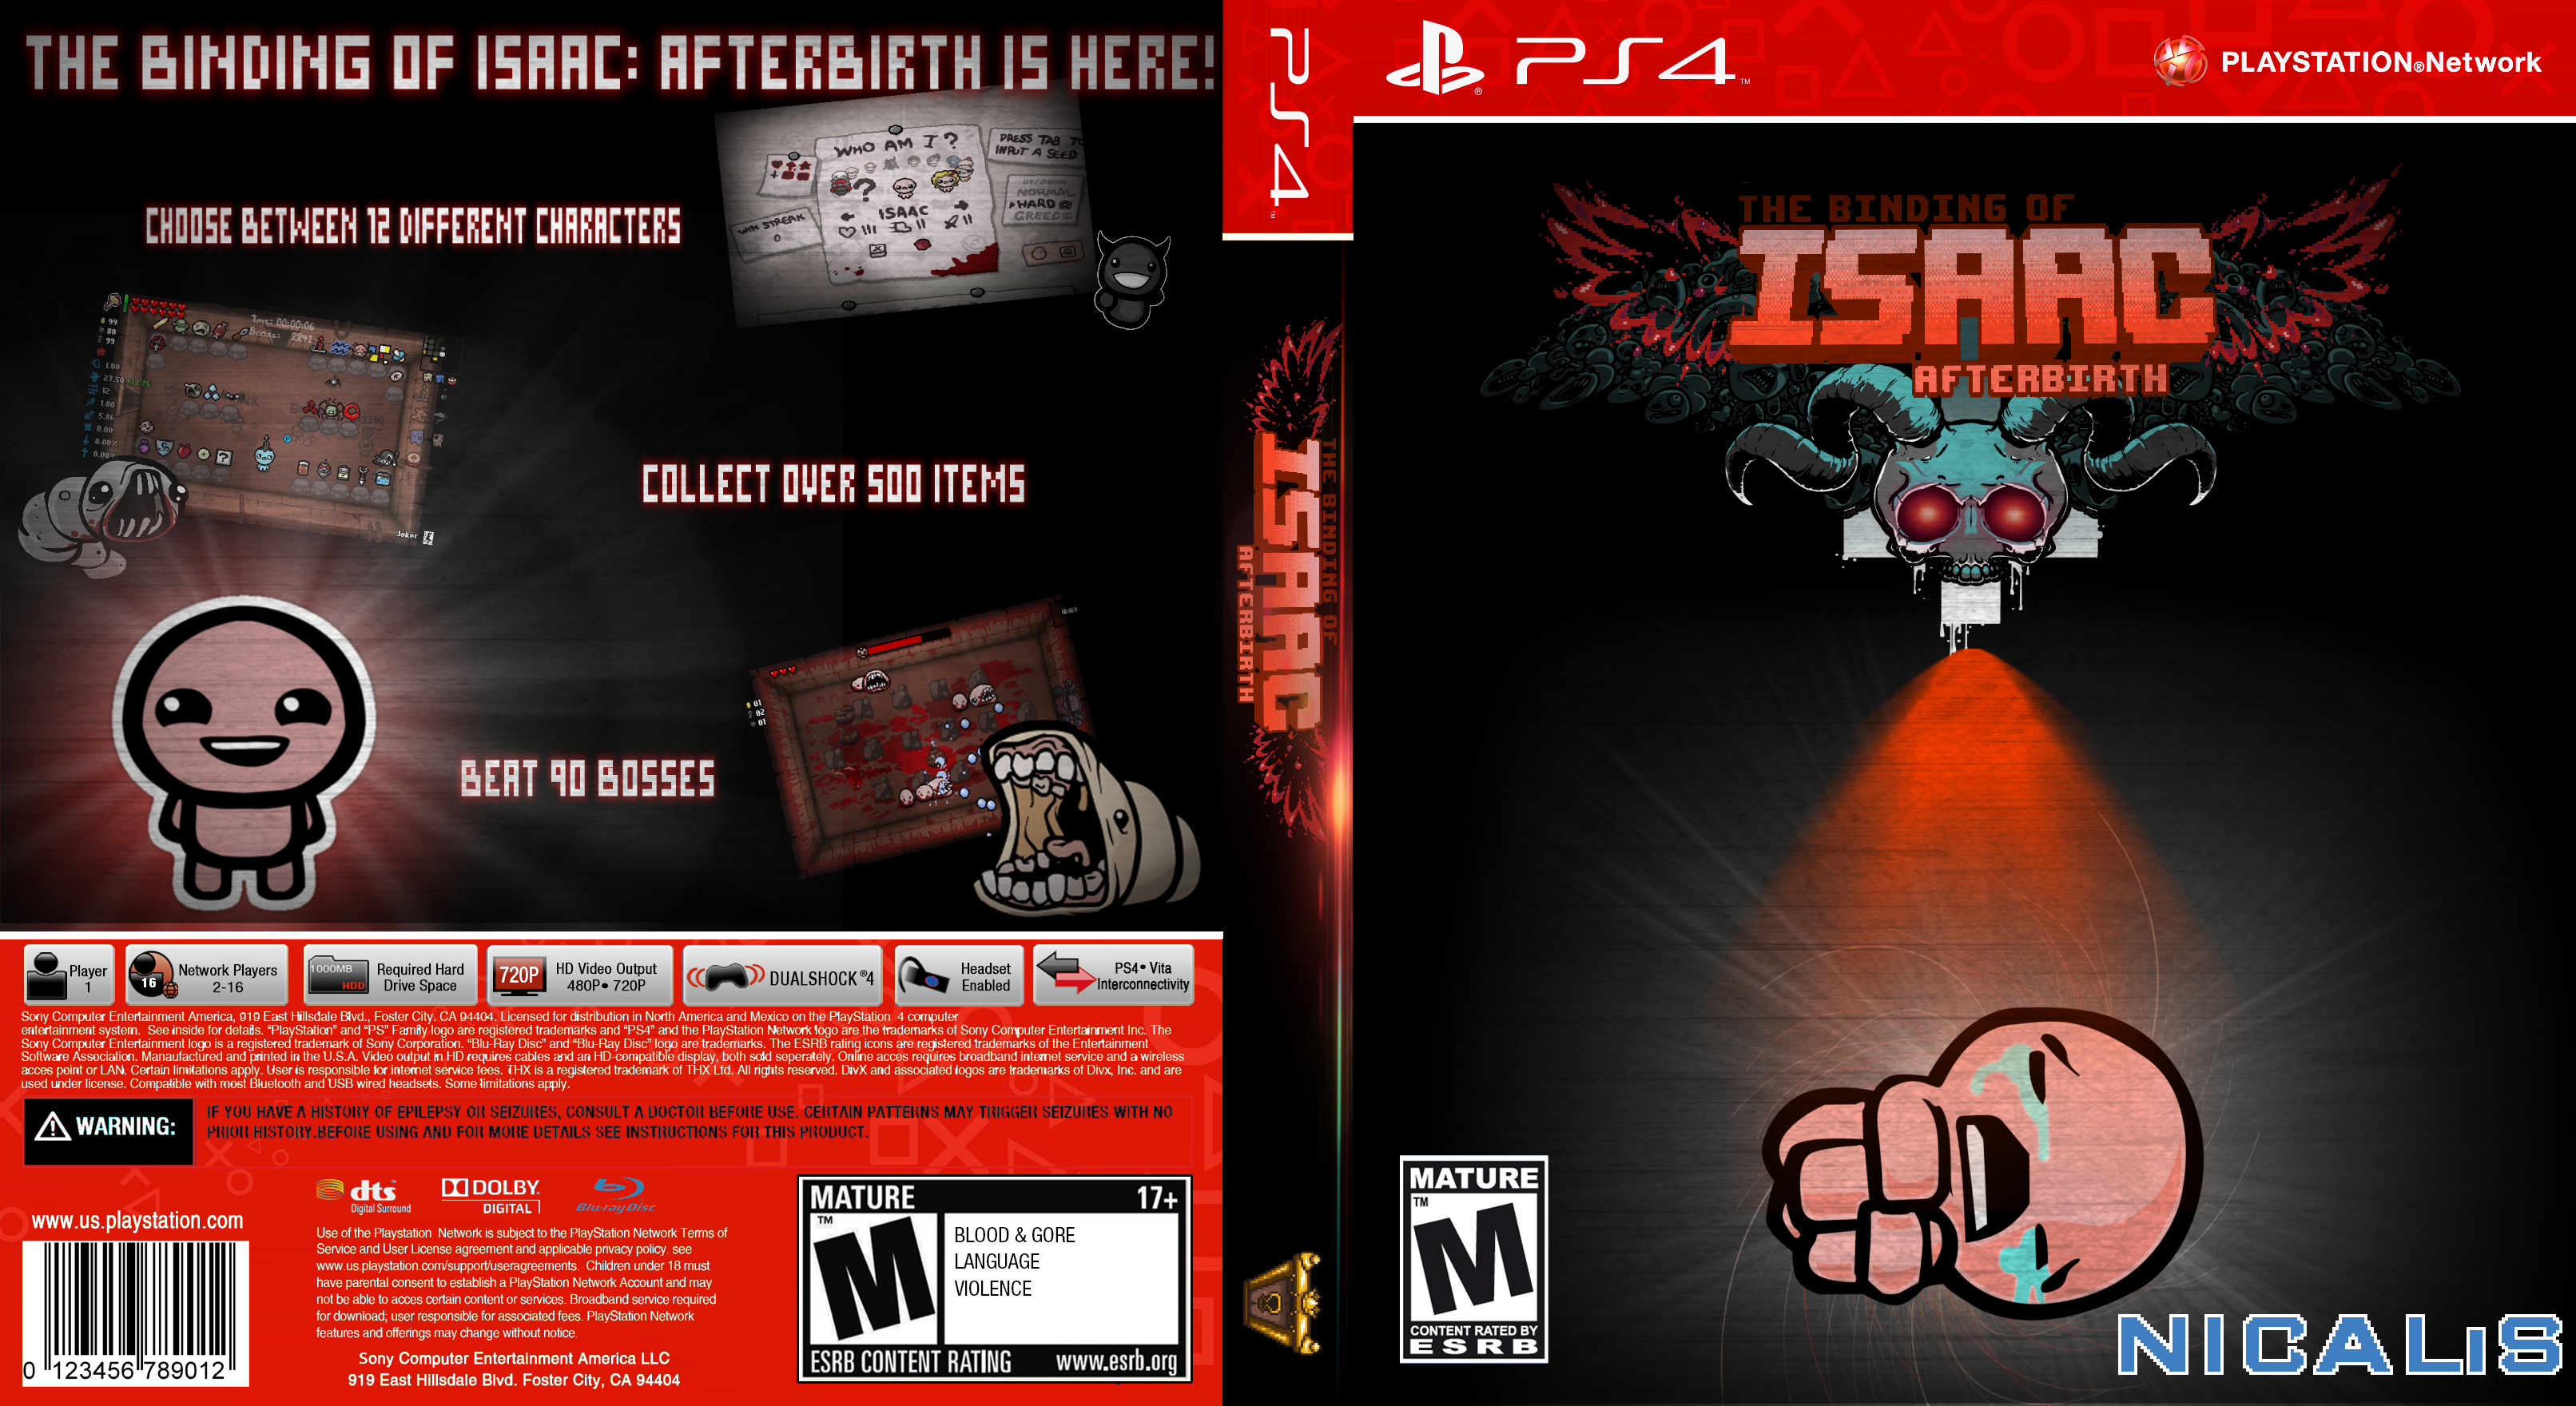 The Binding of Isaac: Afterbirth box cover